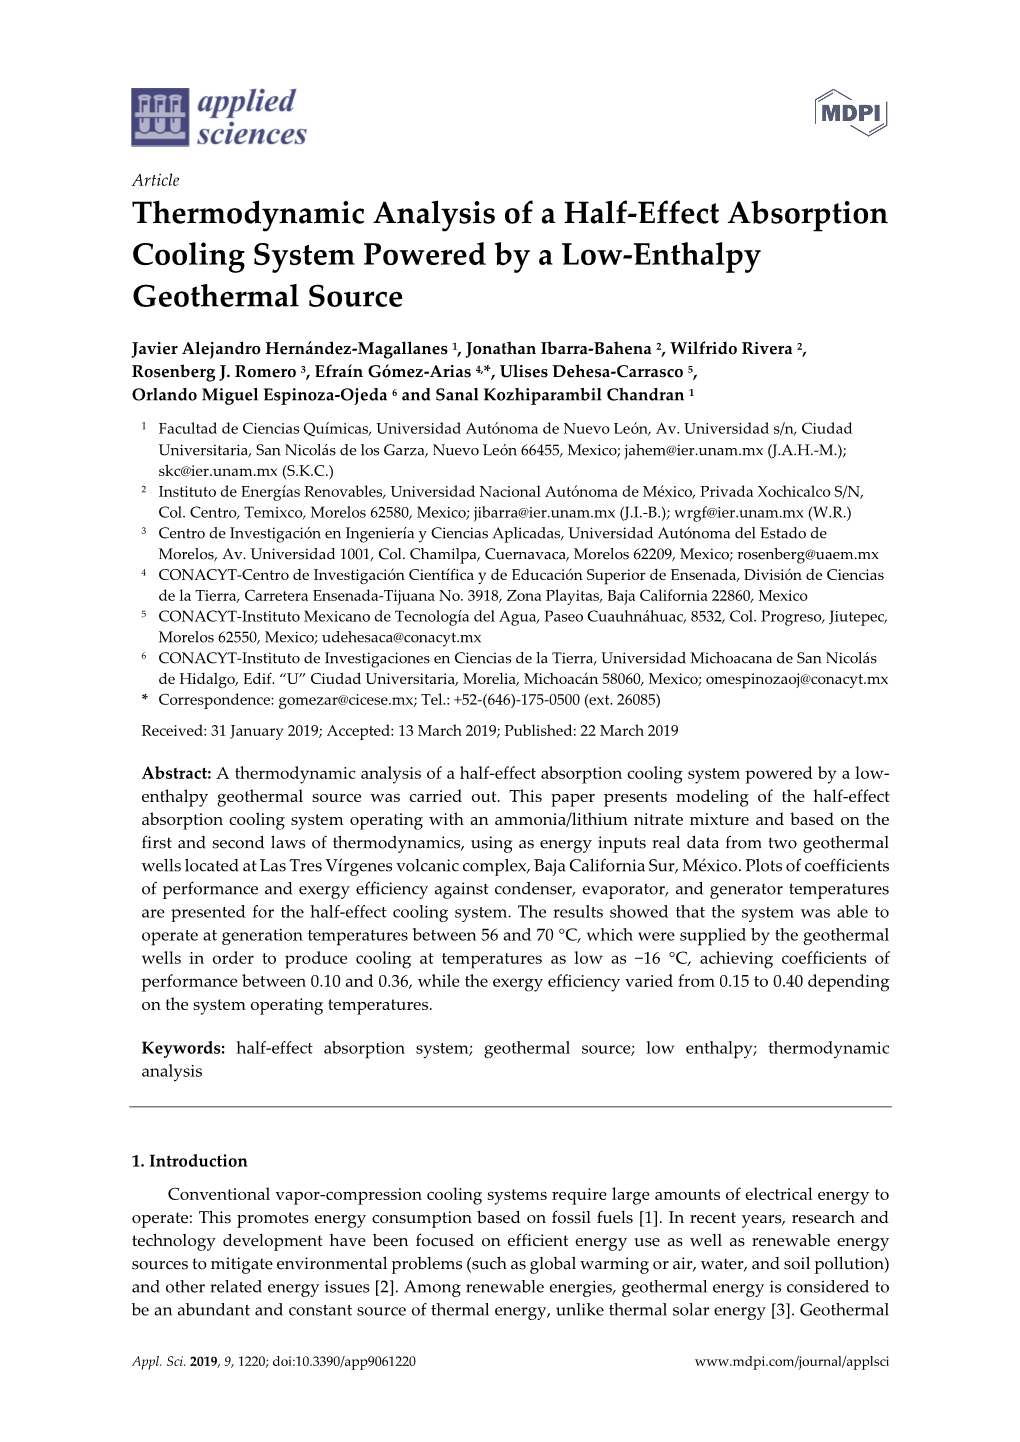 Thermodynamic Analysis of a Half-Effect Absorption Cooling System Powered by a Low-Enthalpy Geothermal Source